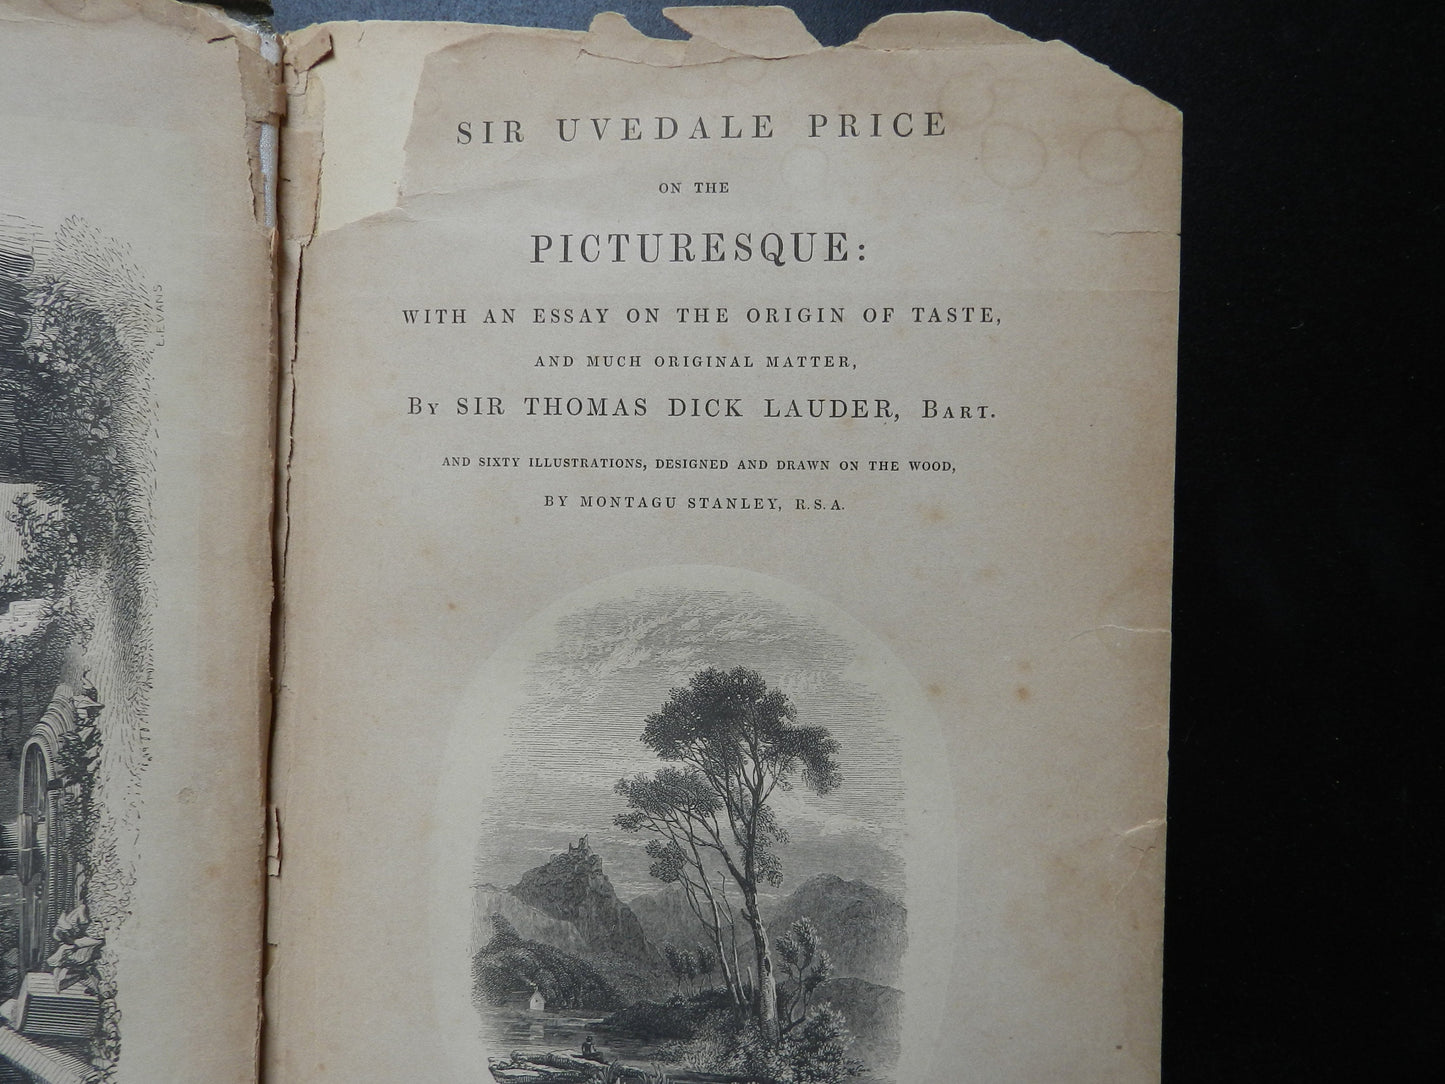 Antique Book "Sir Uvedale Price on the Picturesque" by Lauder 1843  Inscribed by Notable Landscape Architects Gillette, Manning & Palmer